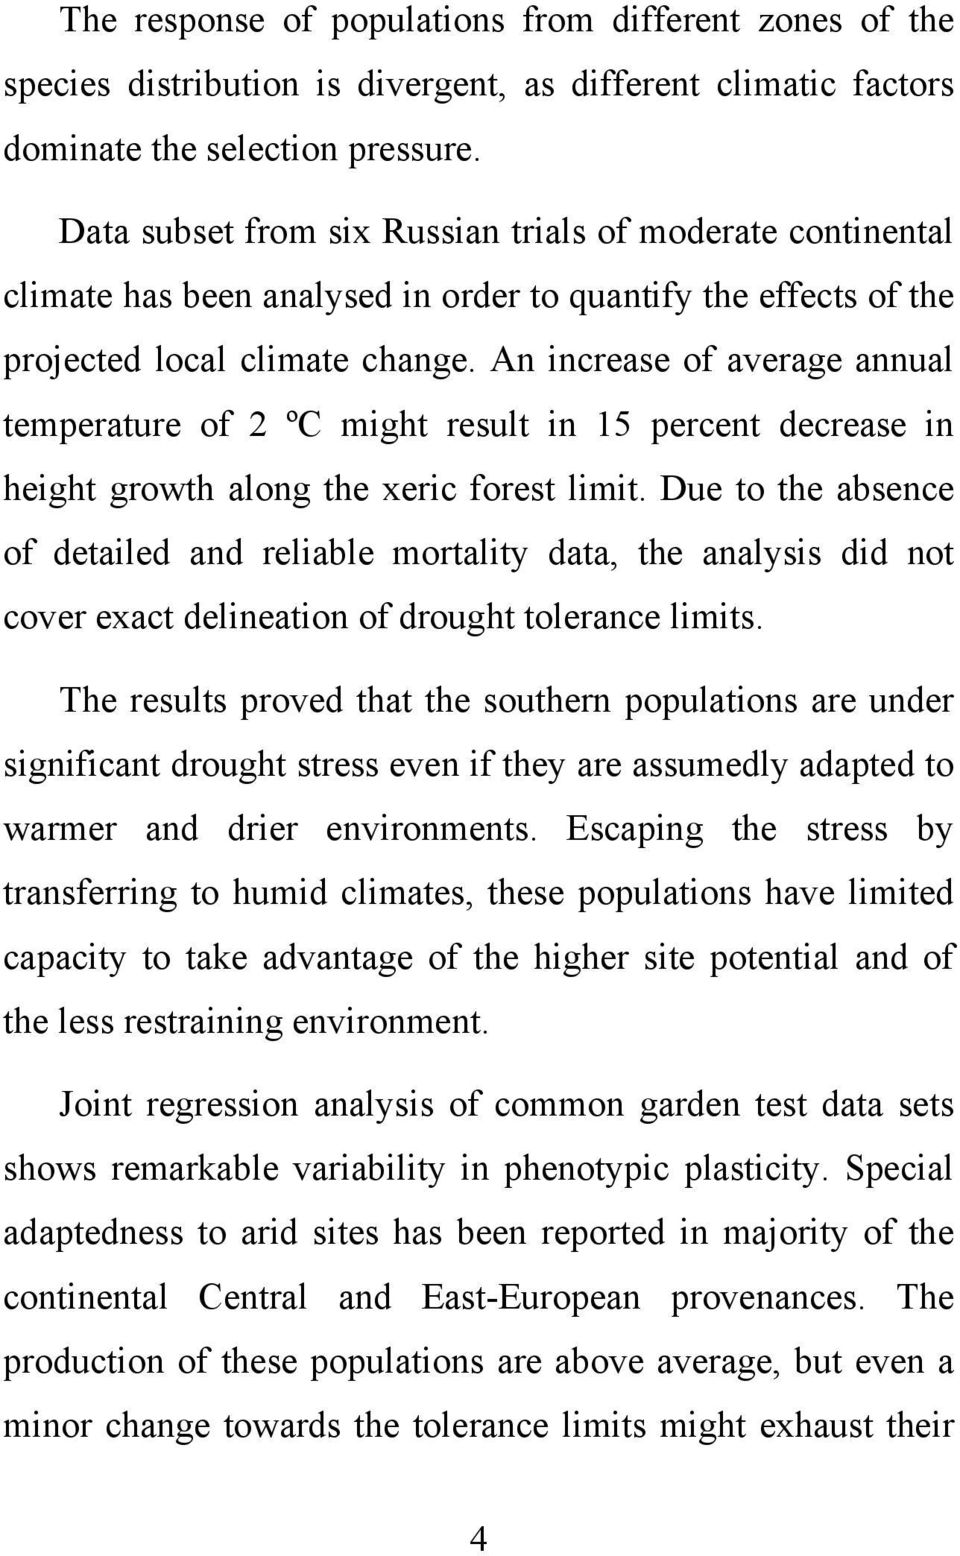 An increase of average annual temperature of 2 ºC might result in 15 percent decrease in height growth along the xeric forest limit.